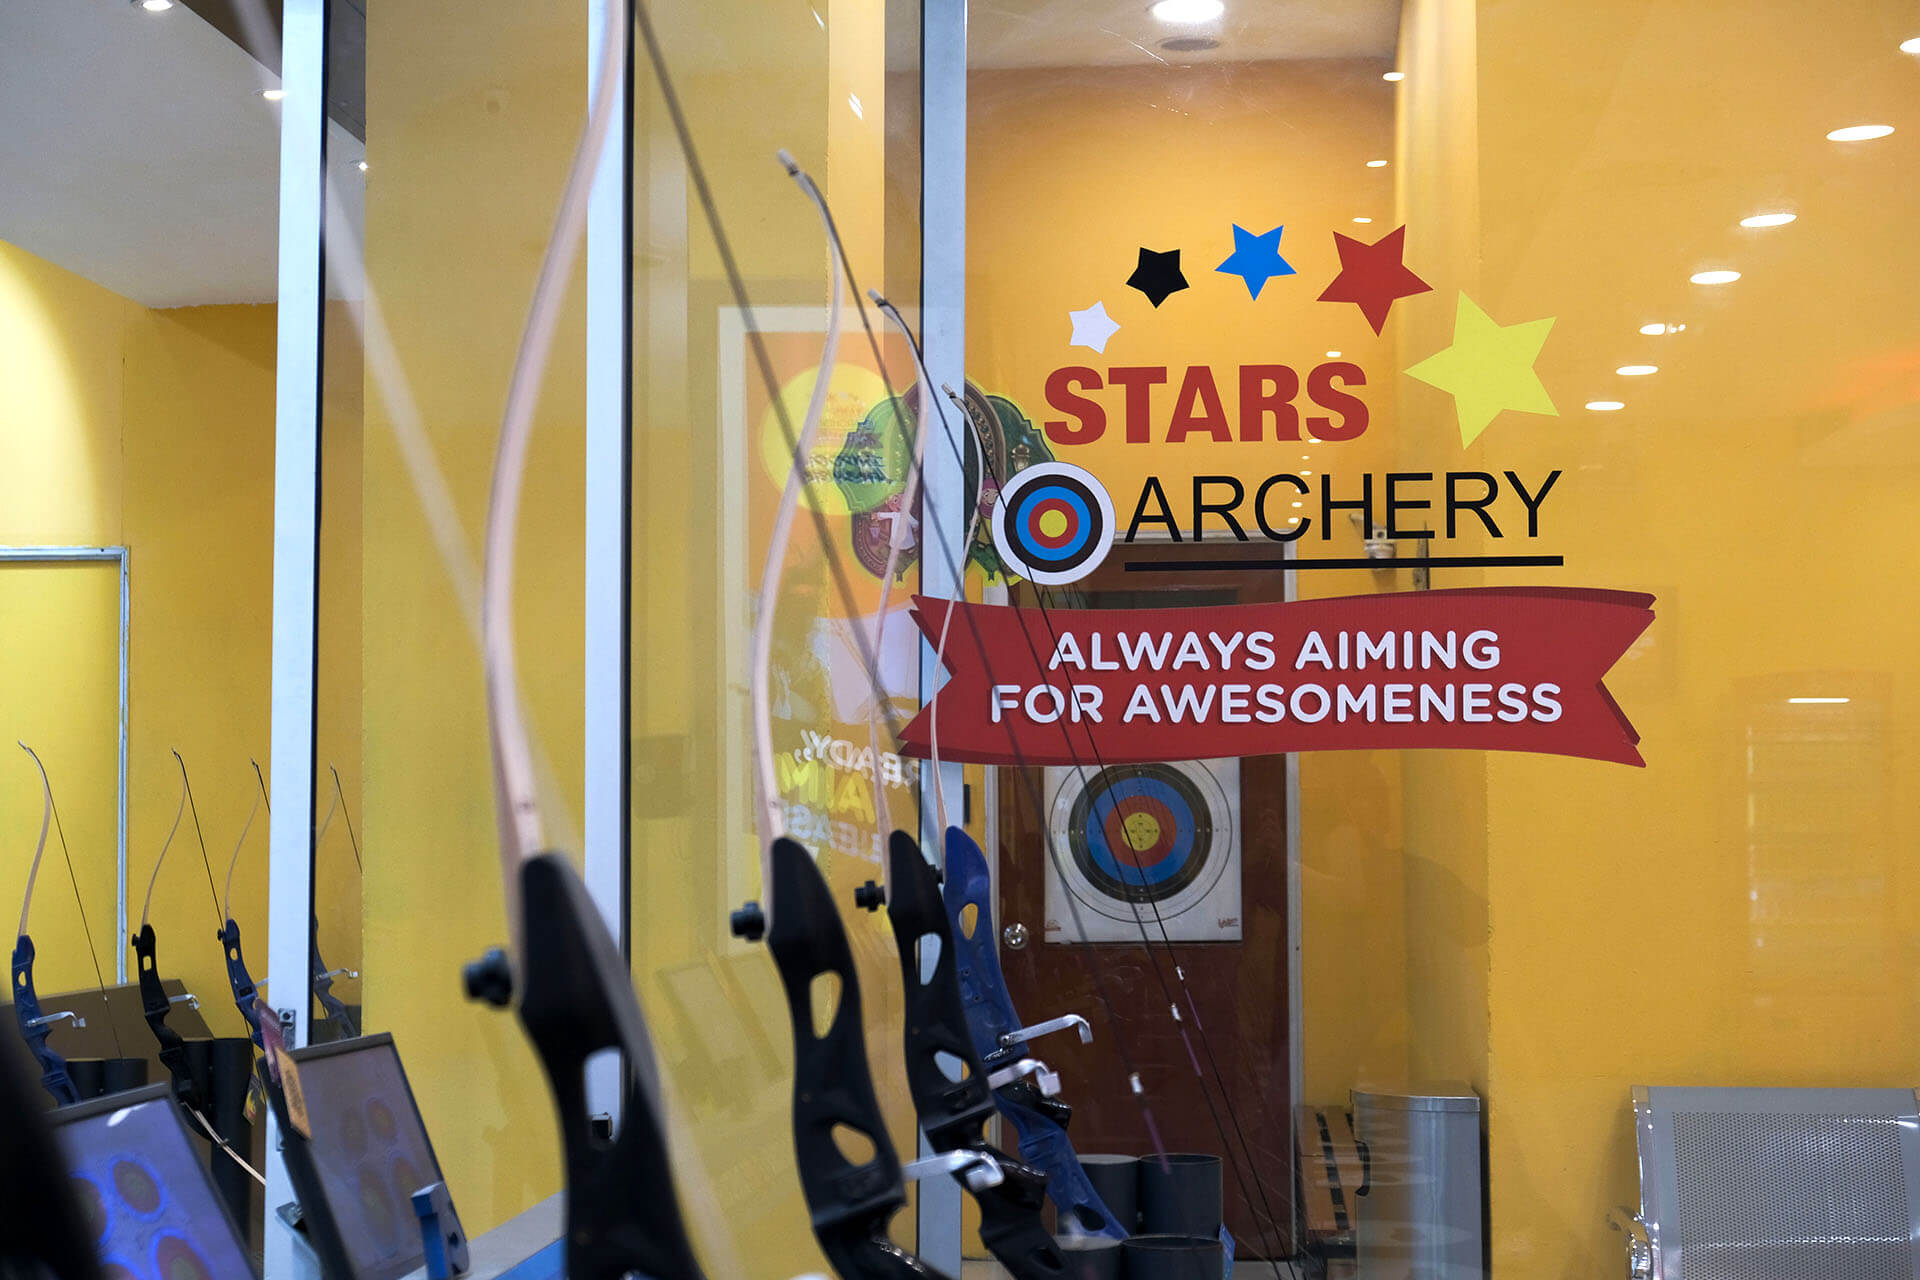 Stars Archery - How accurate is your aim? Let’s put it to the test!